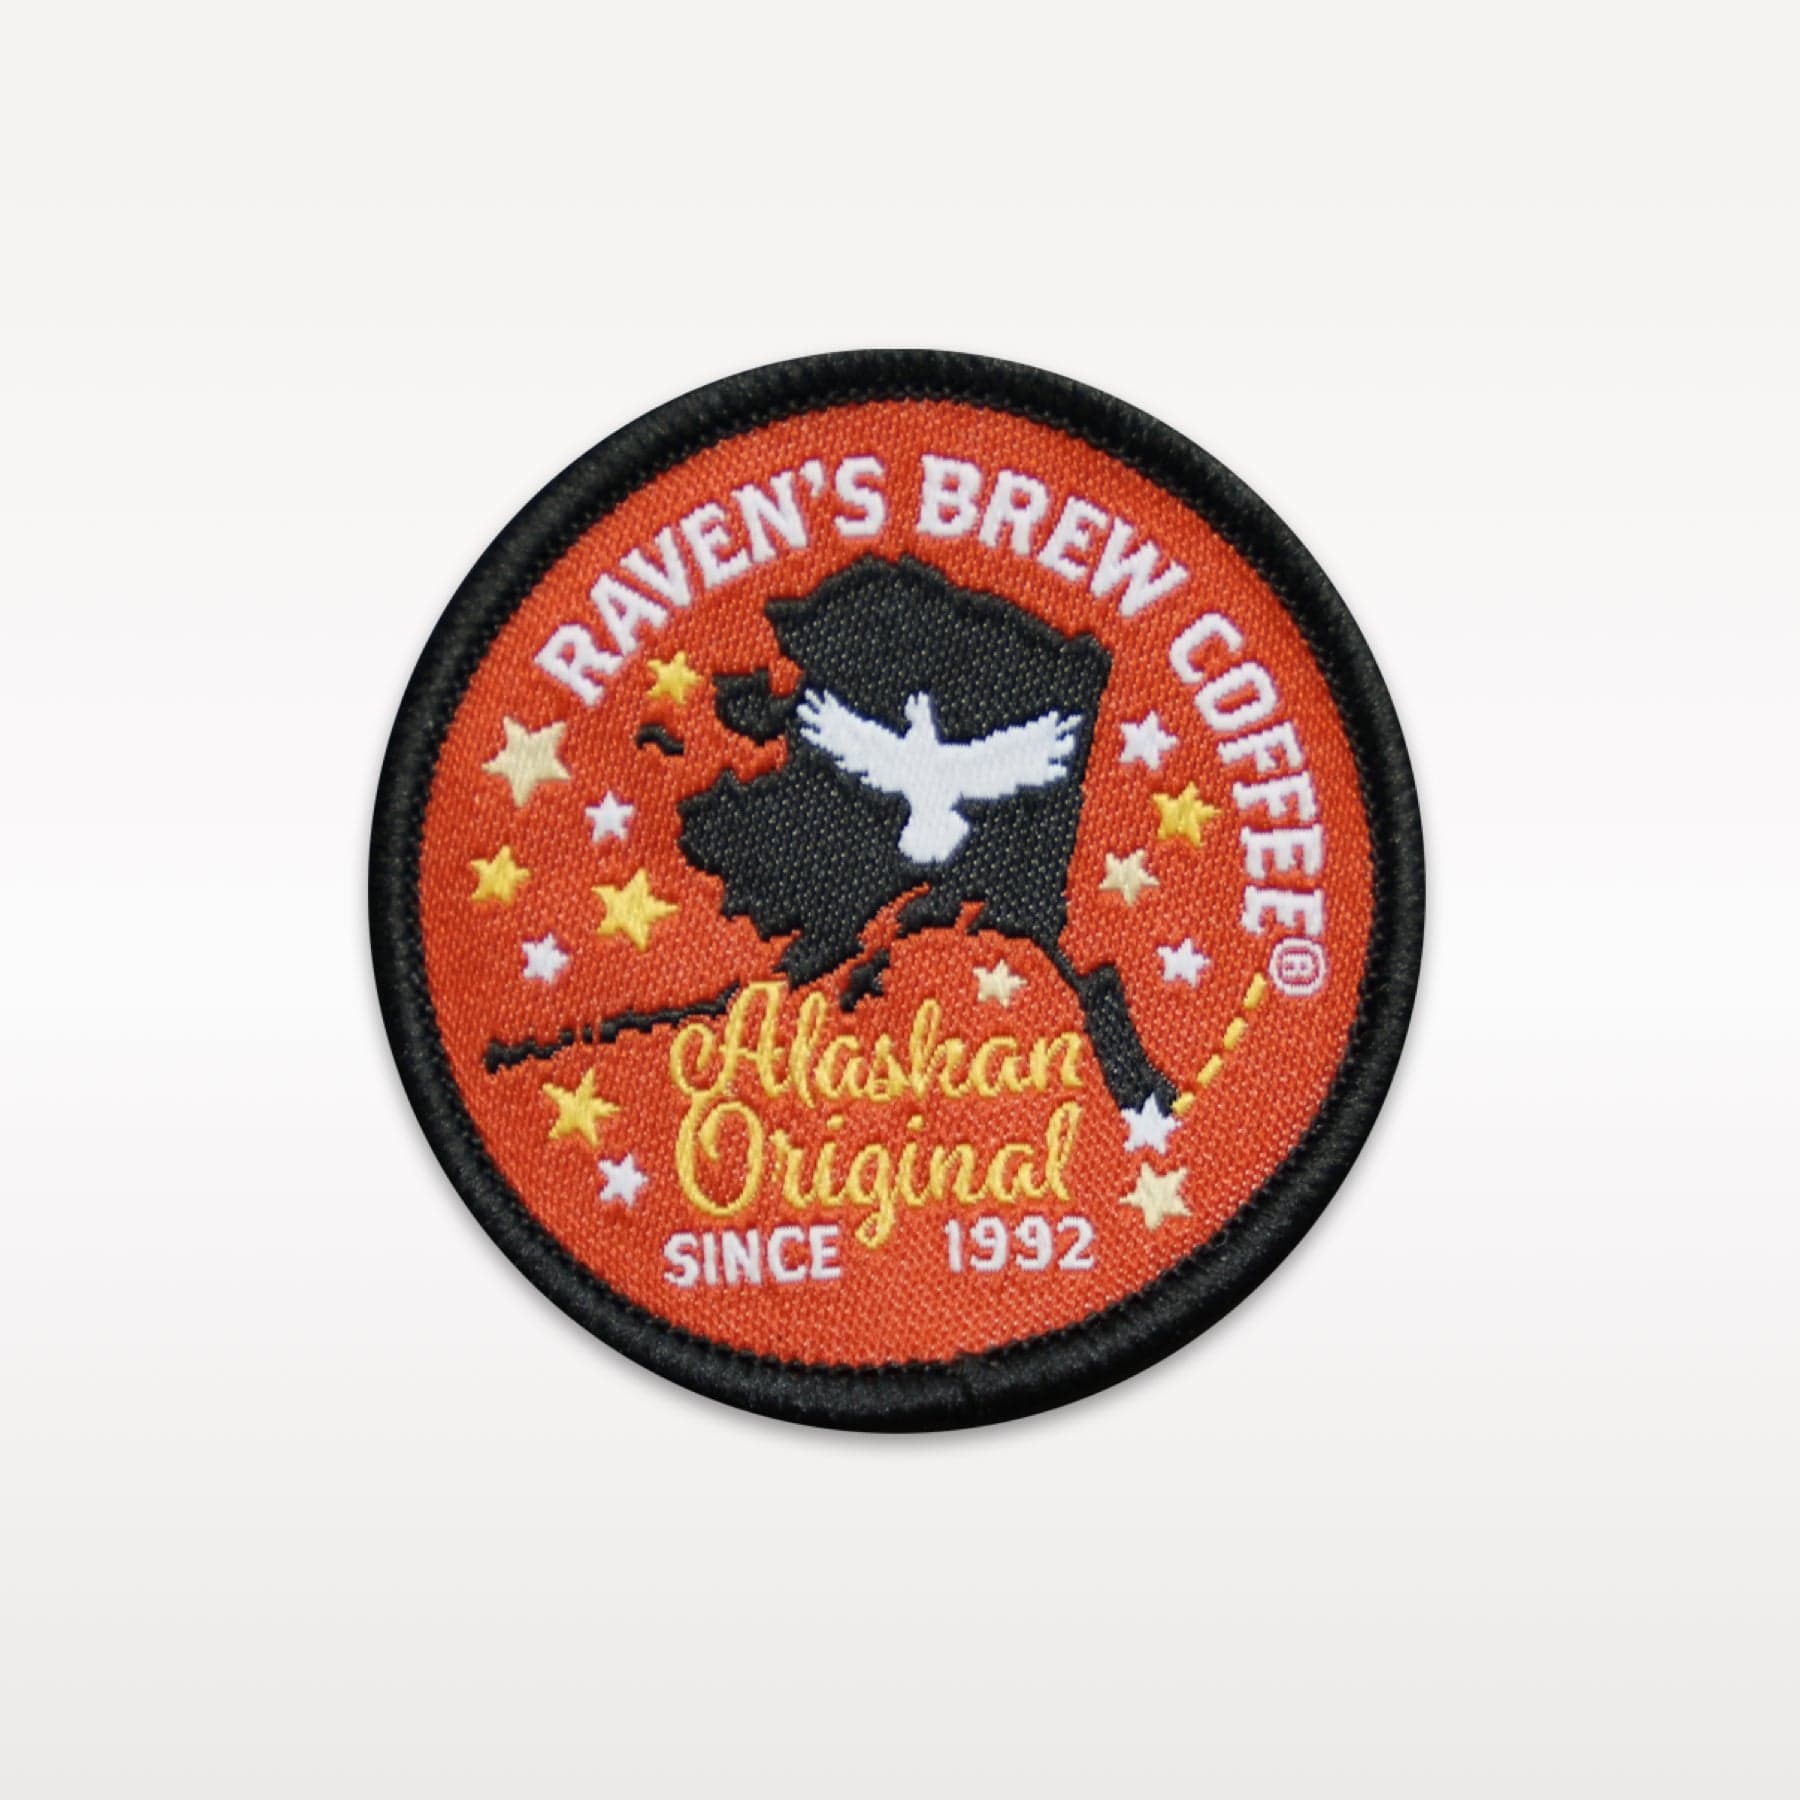 Round Raven's Brew Coffee embroidered patch featuring a raven within a silhouette of Alaska, surrounded by stars, with the words 